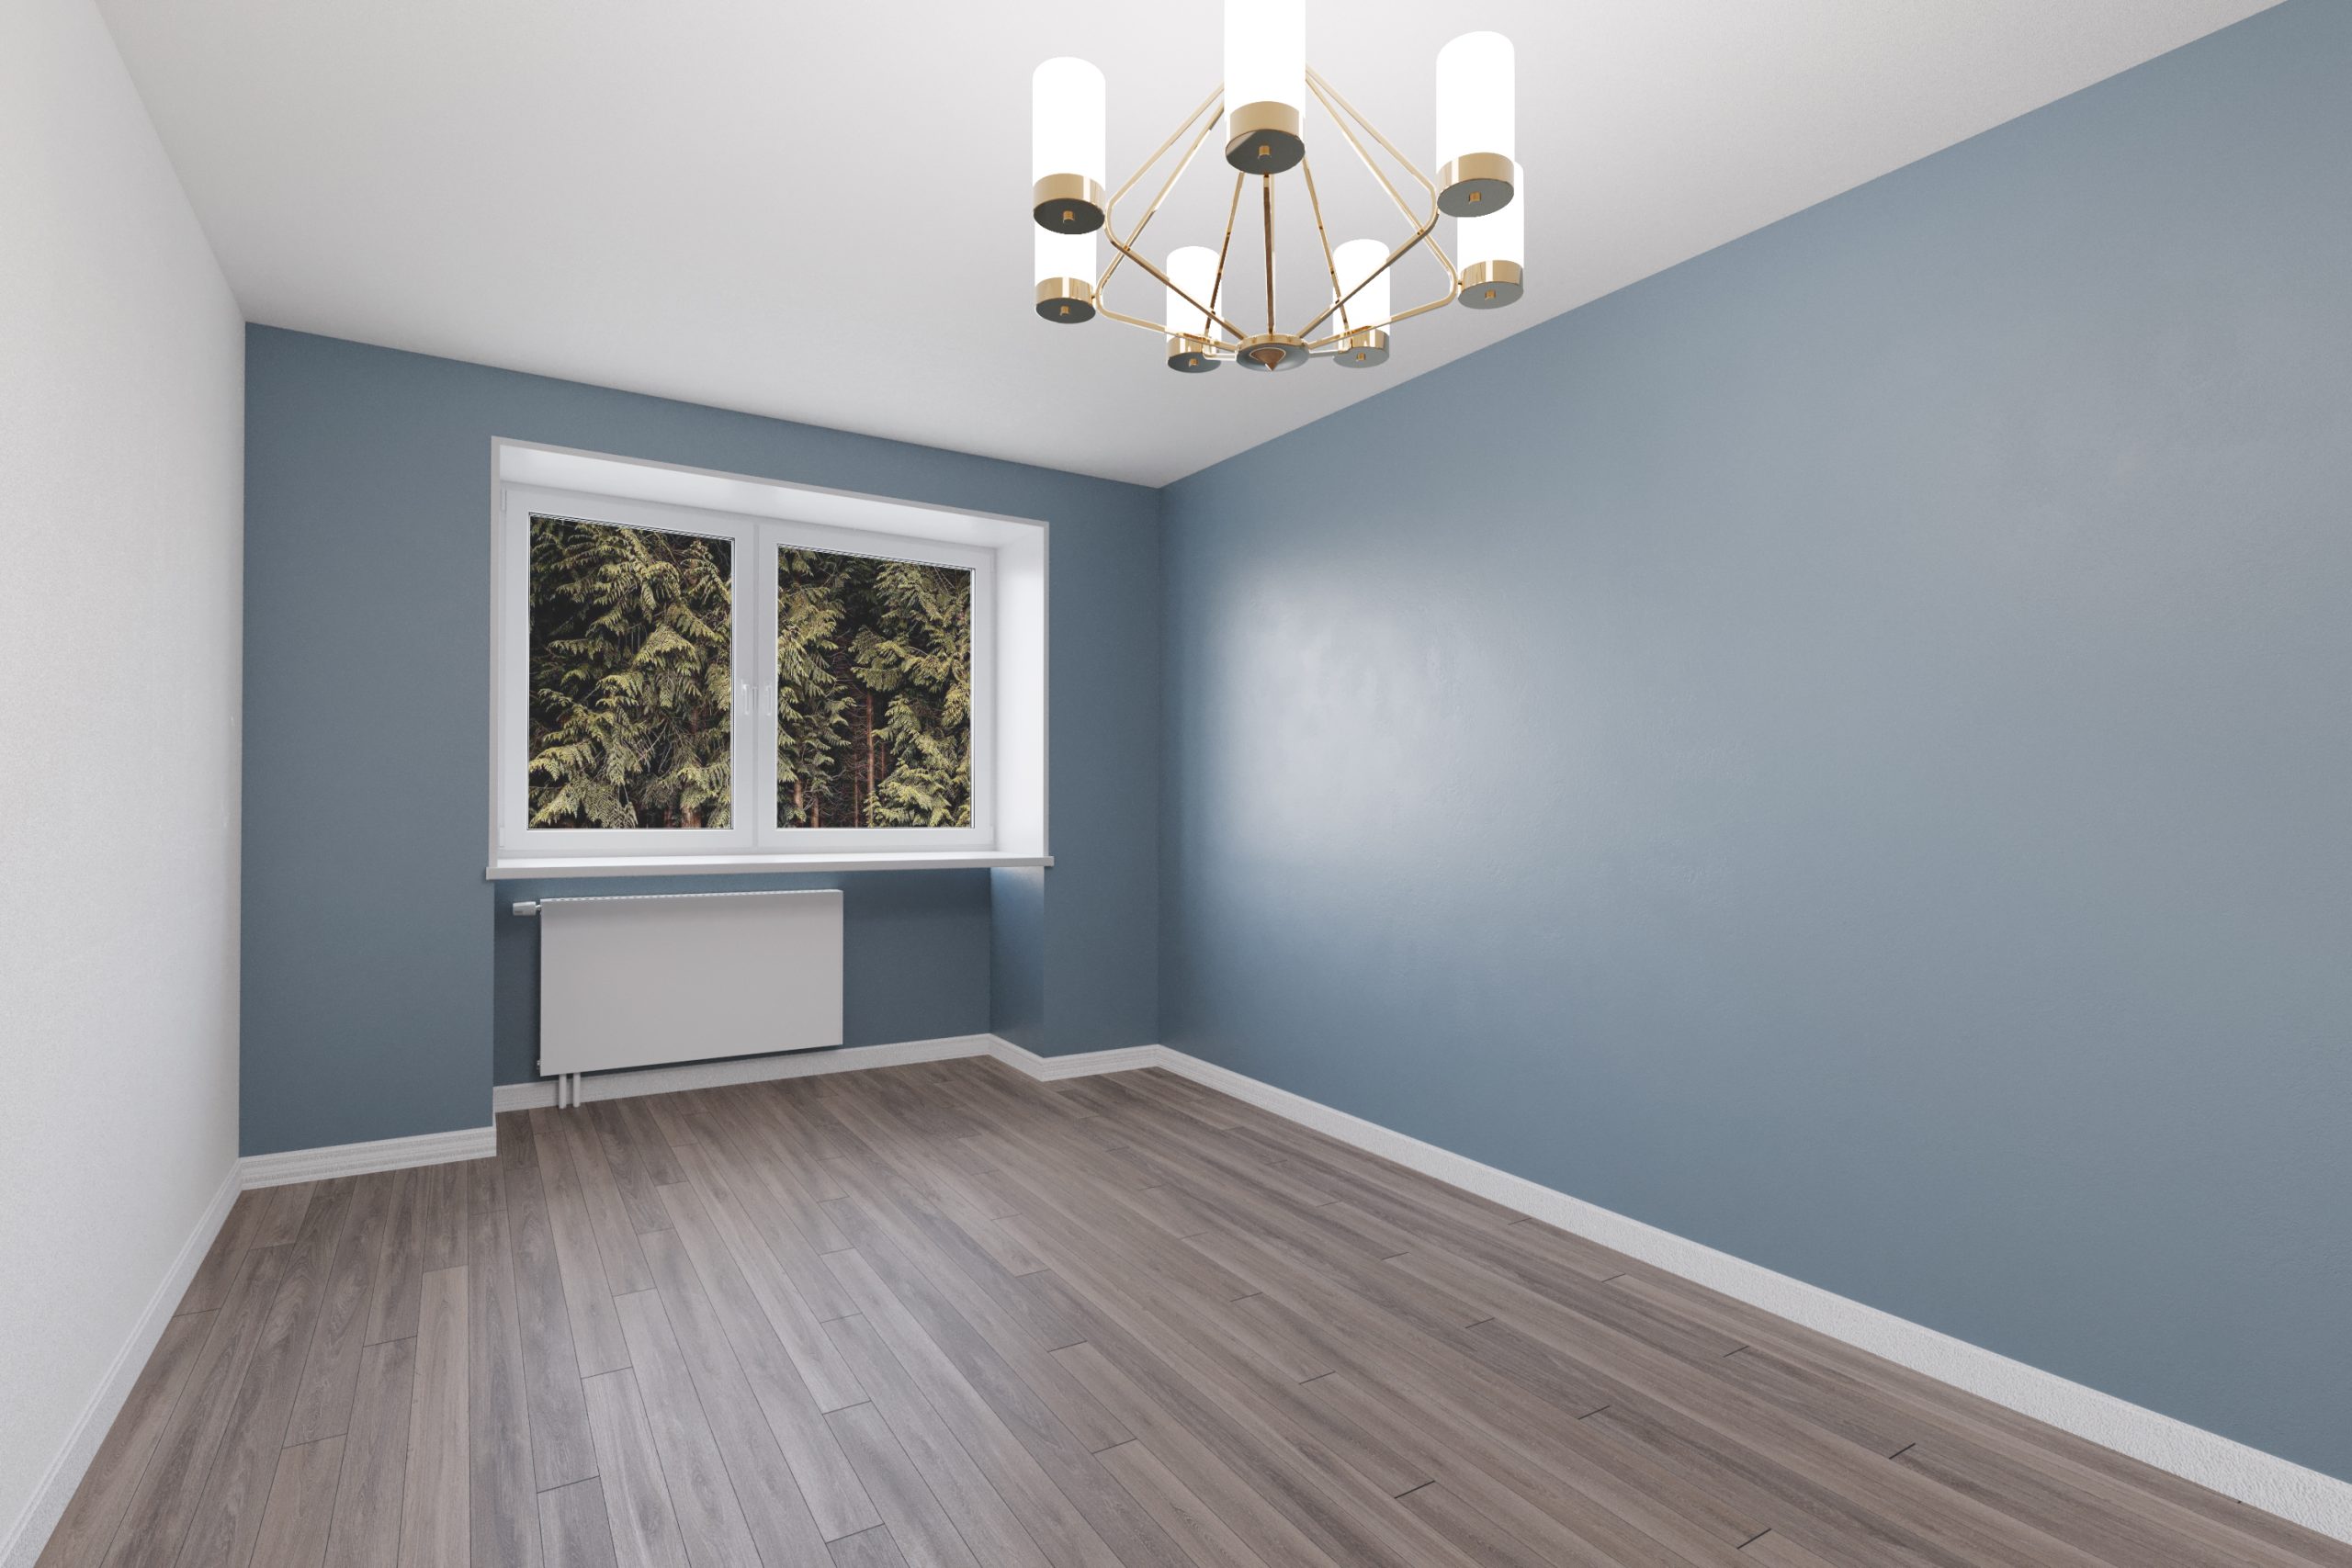 Interior of a living room transformed with powder blue walls, no furniture